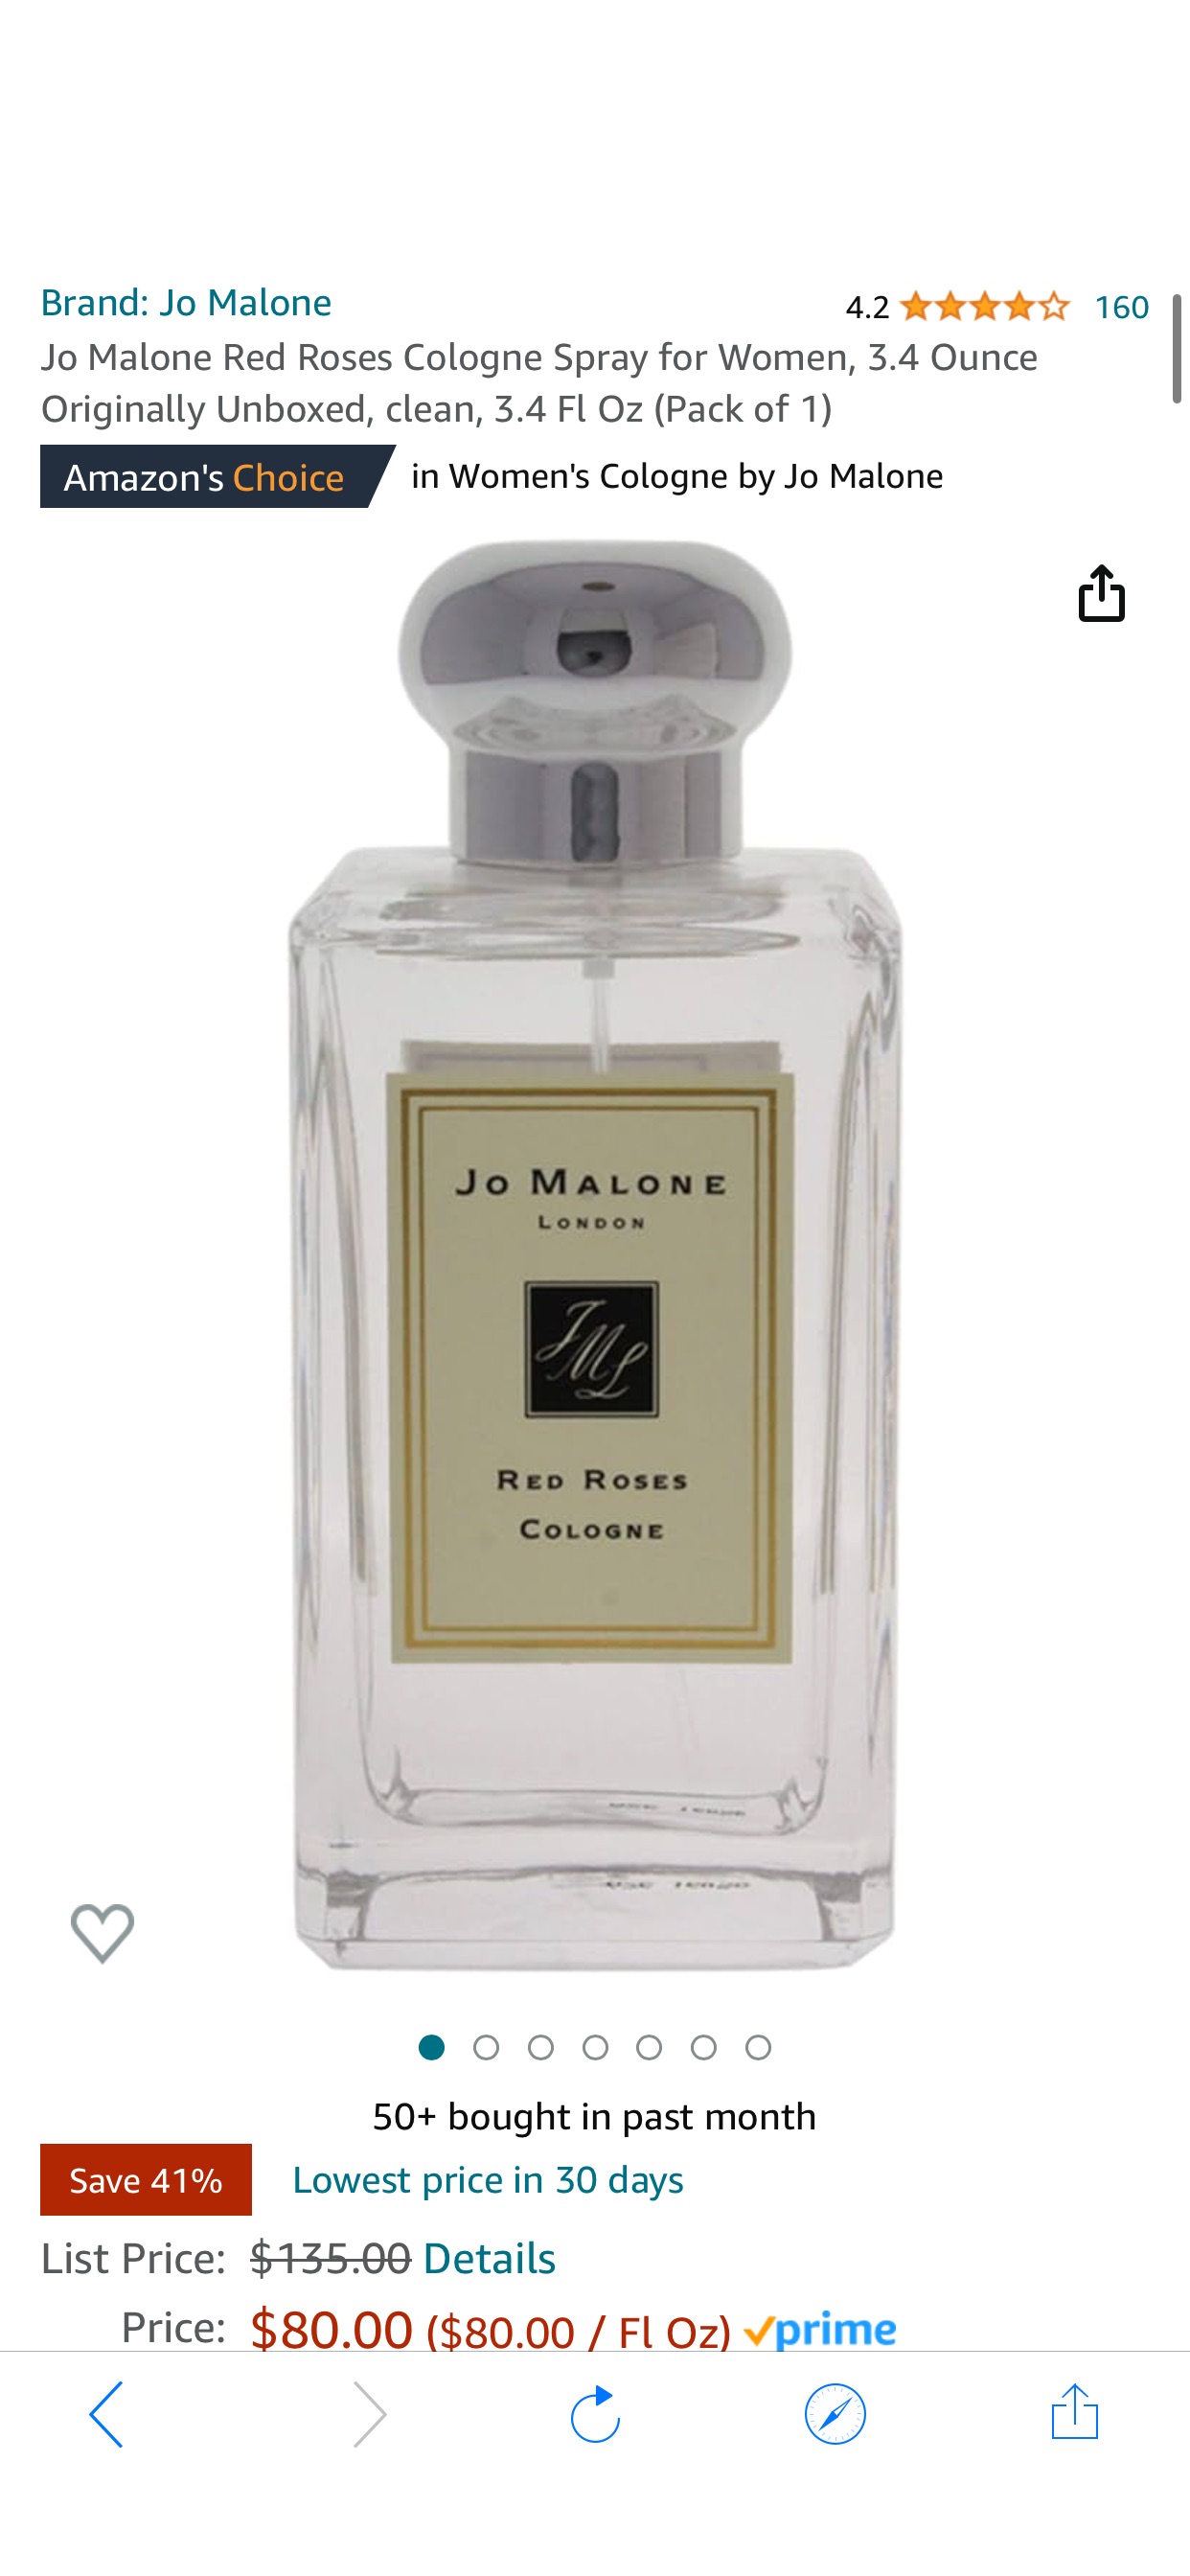 Amazon.com : Jo Malone Red Roses Cologne Spray for Women, 3.4 Ounce Originally Unboxed, clean, 3.4 Fl Oz (Pack of 1) : Beauty & Personal Care 祖马龙红玫瑰香水